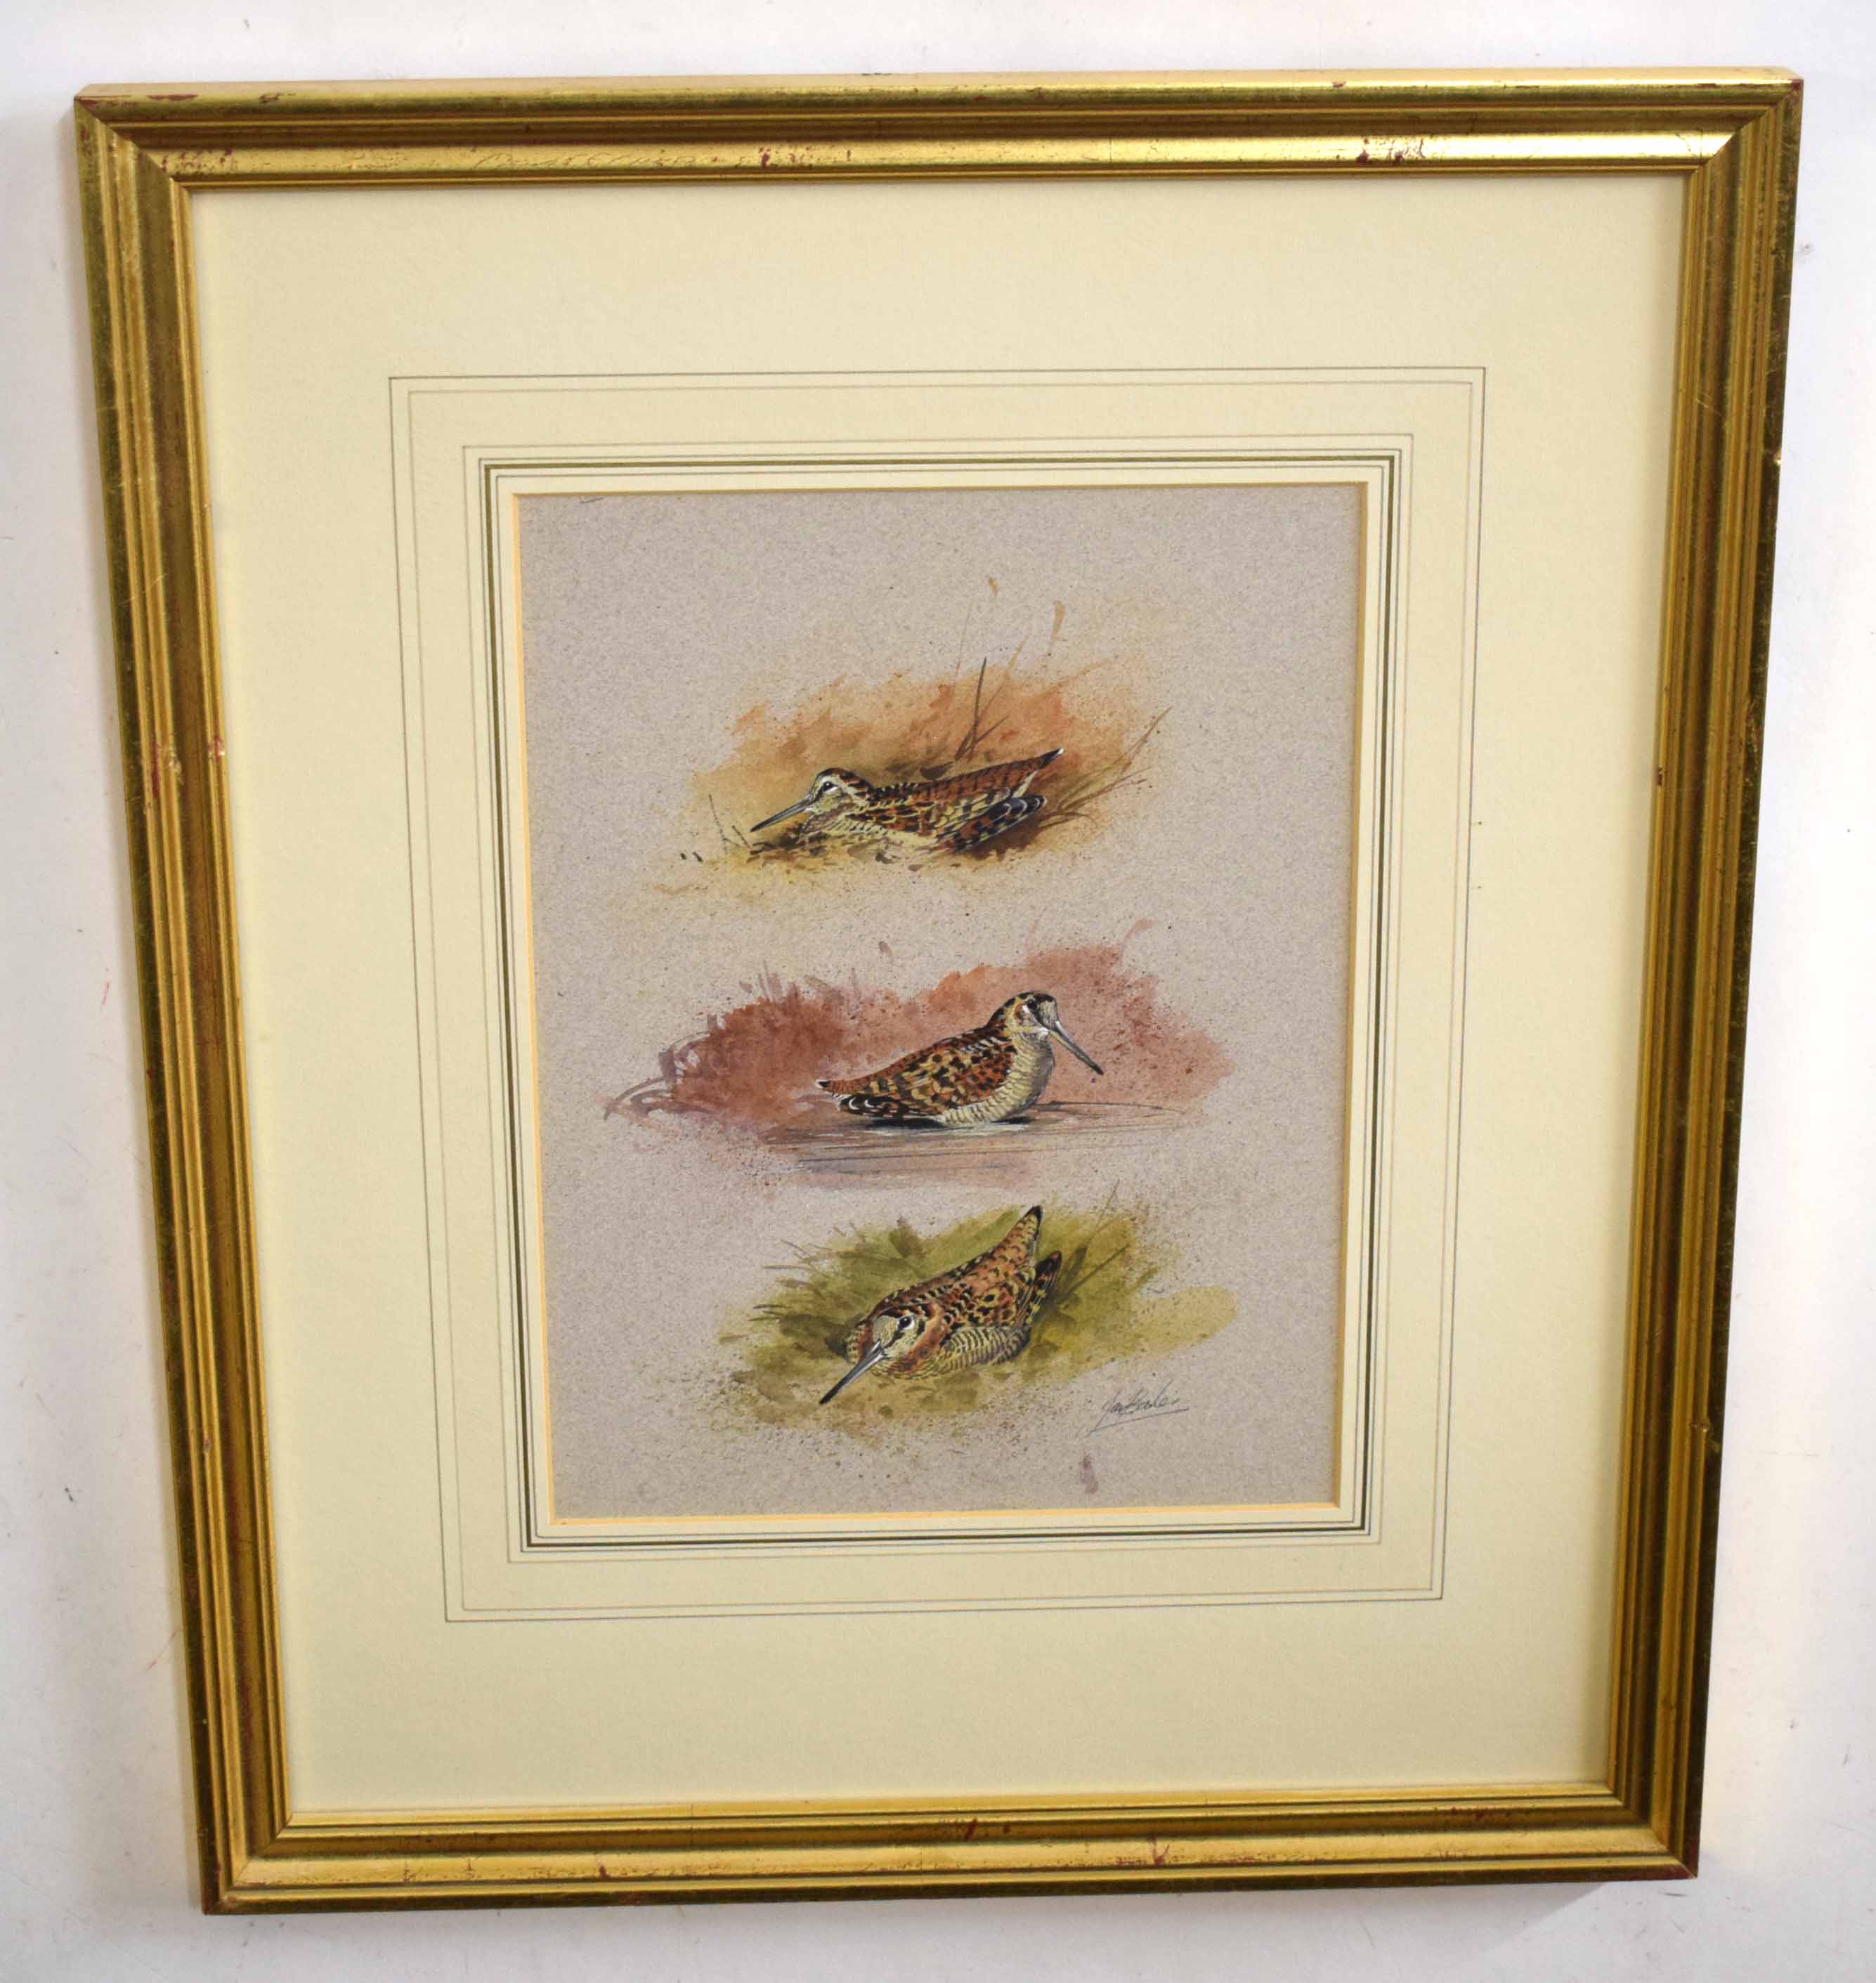 Ian Bowles (born 1947), "Pheasant", "Grouse", "Partridge" and "Snipe", set of four watercolours, all